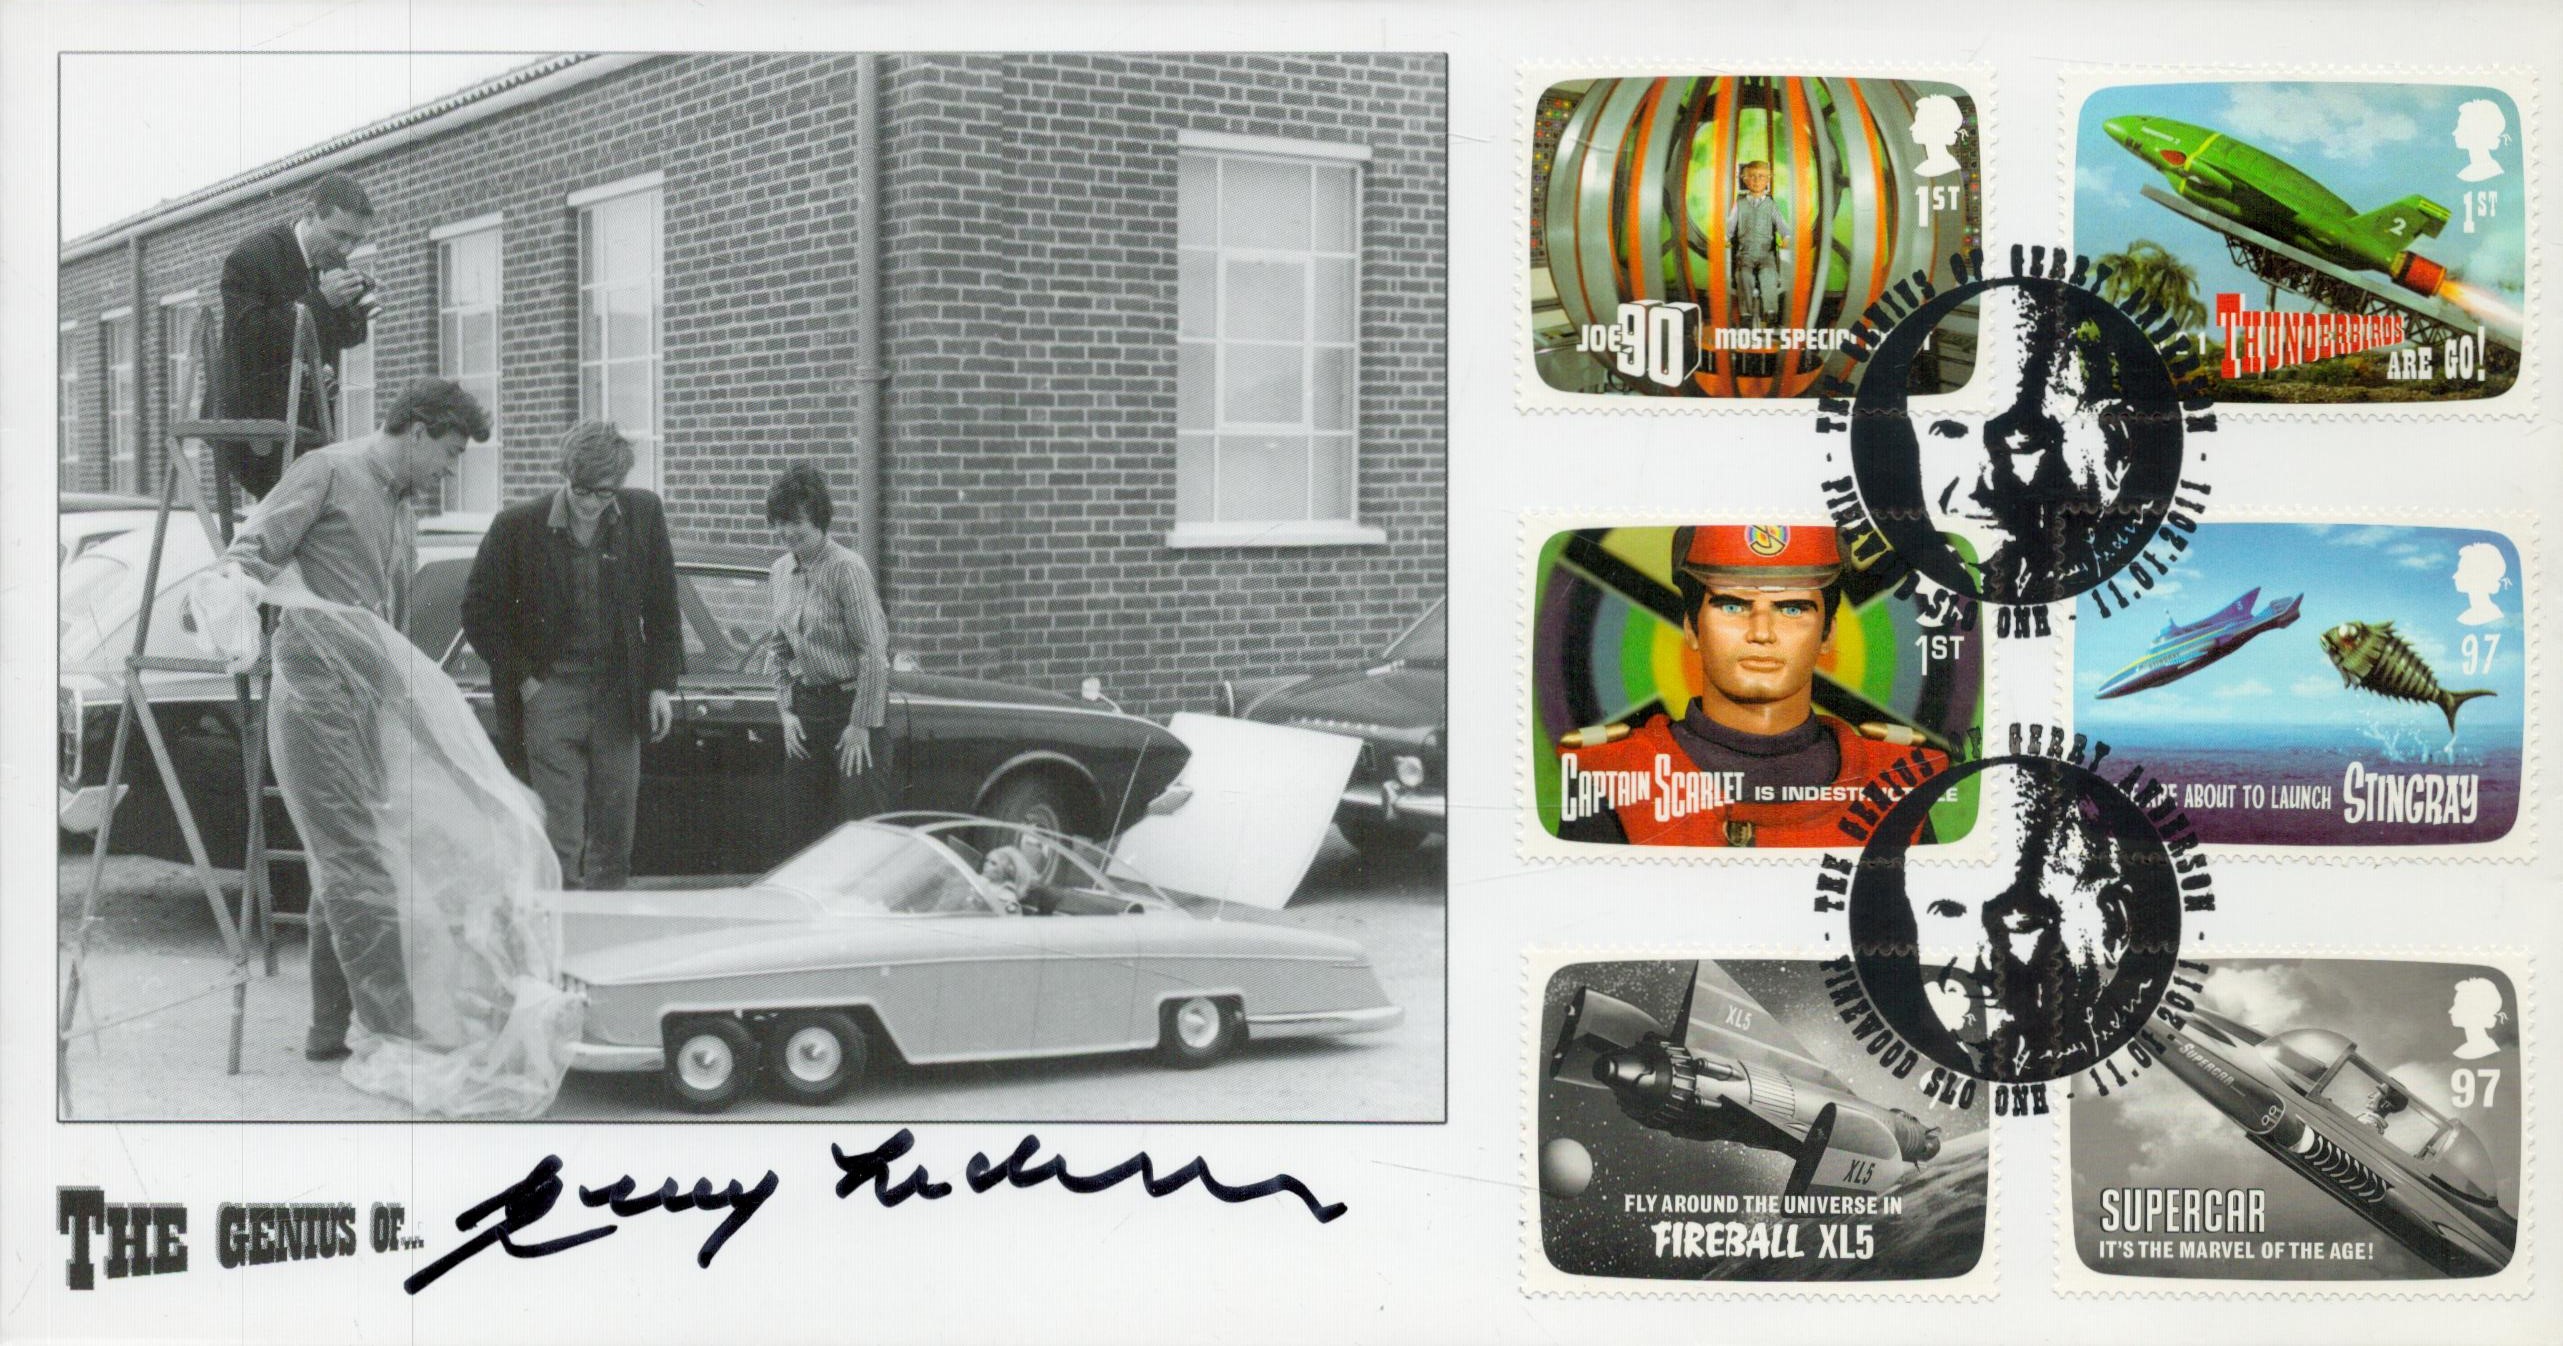 Gerry Anderson signed Genius of Gerry Anderson Scott official FDC with Anderson 2011 special